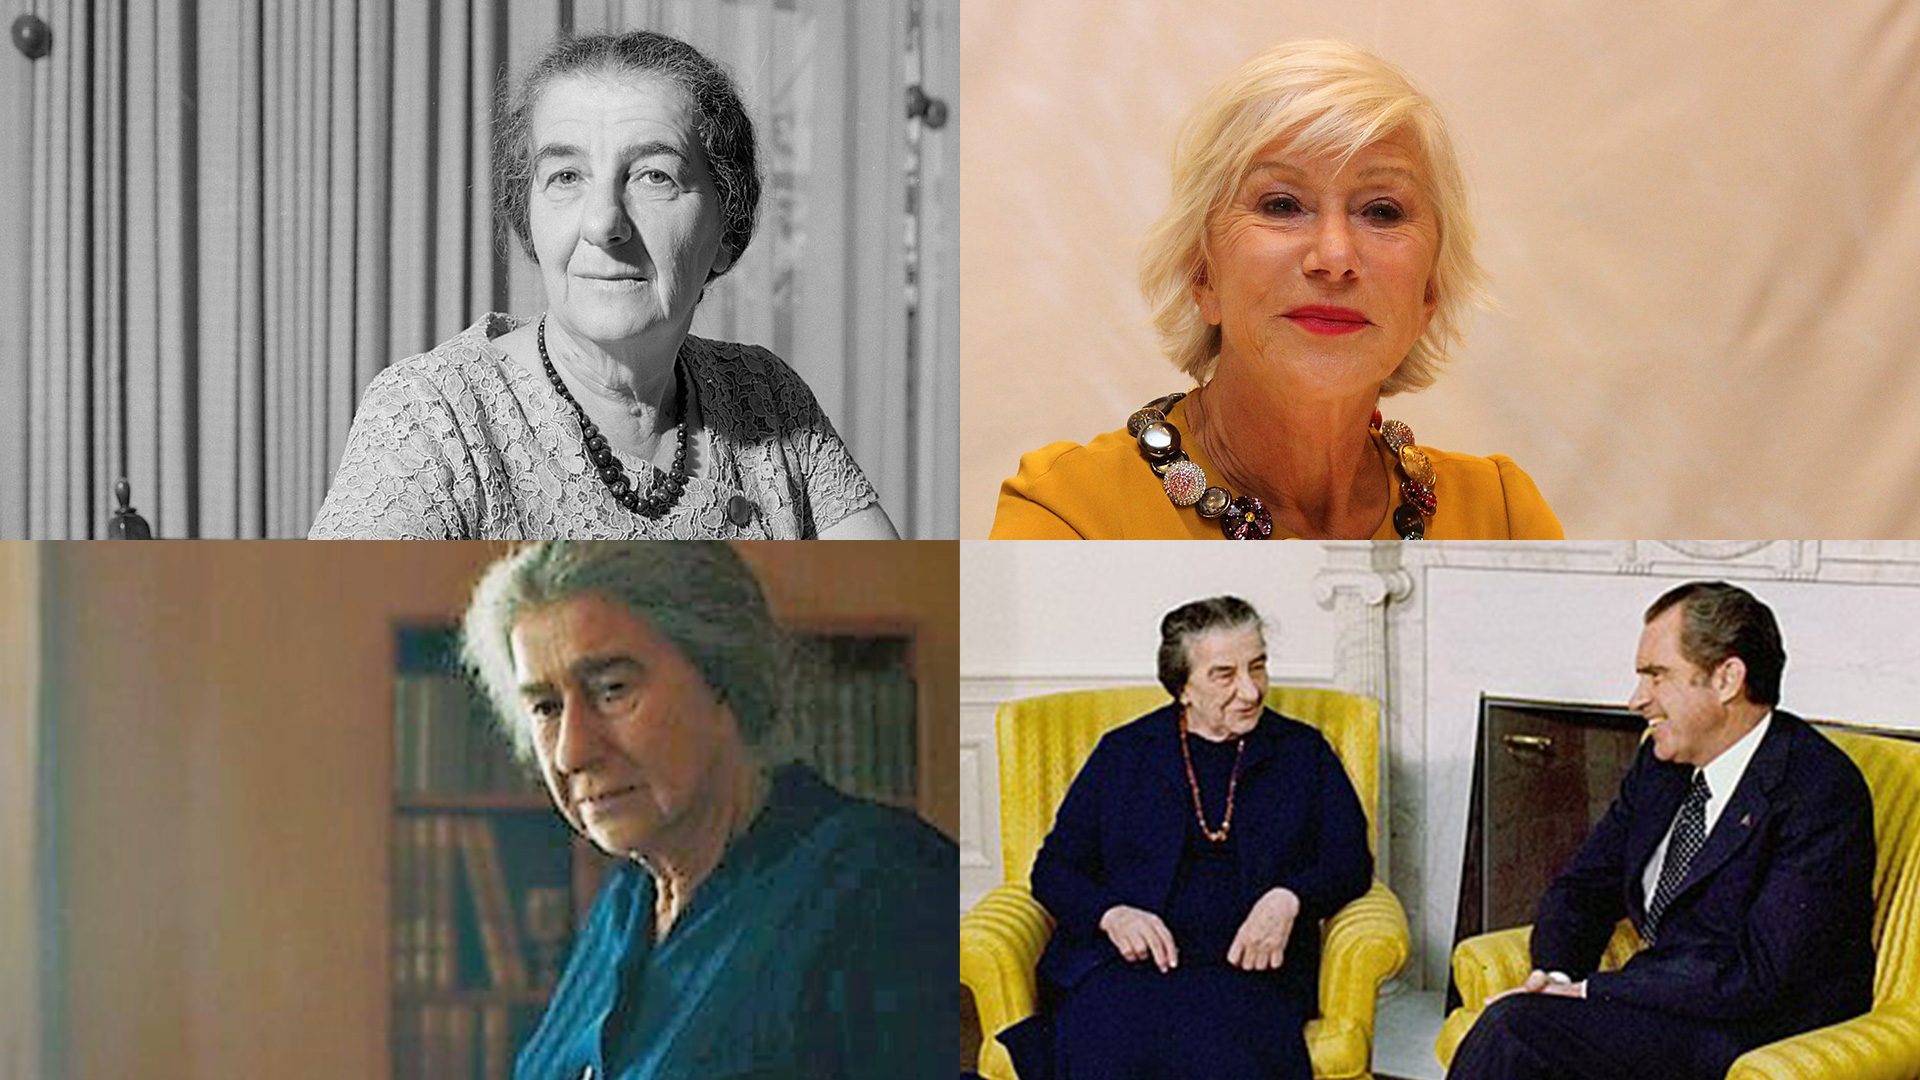 [Only IN Hollywood] Helen Mirren adds Golda Meir, the Iron Lady, to her list of powerful women roles